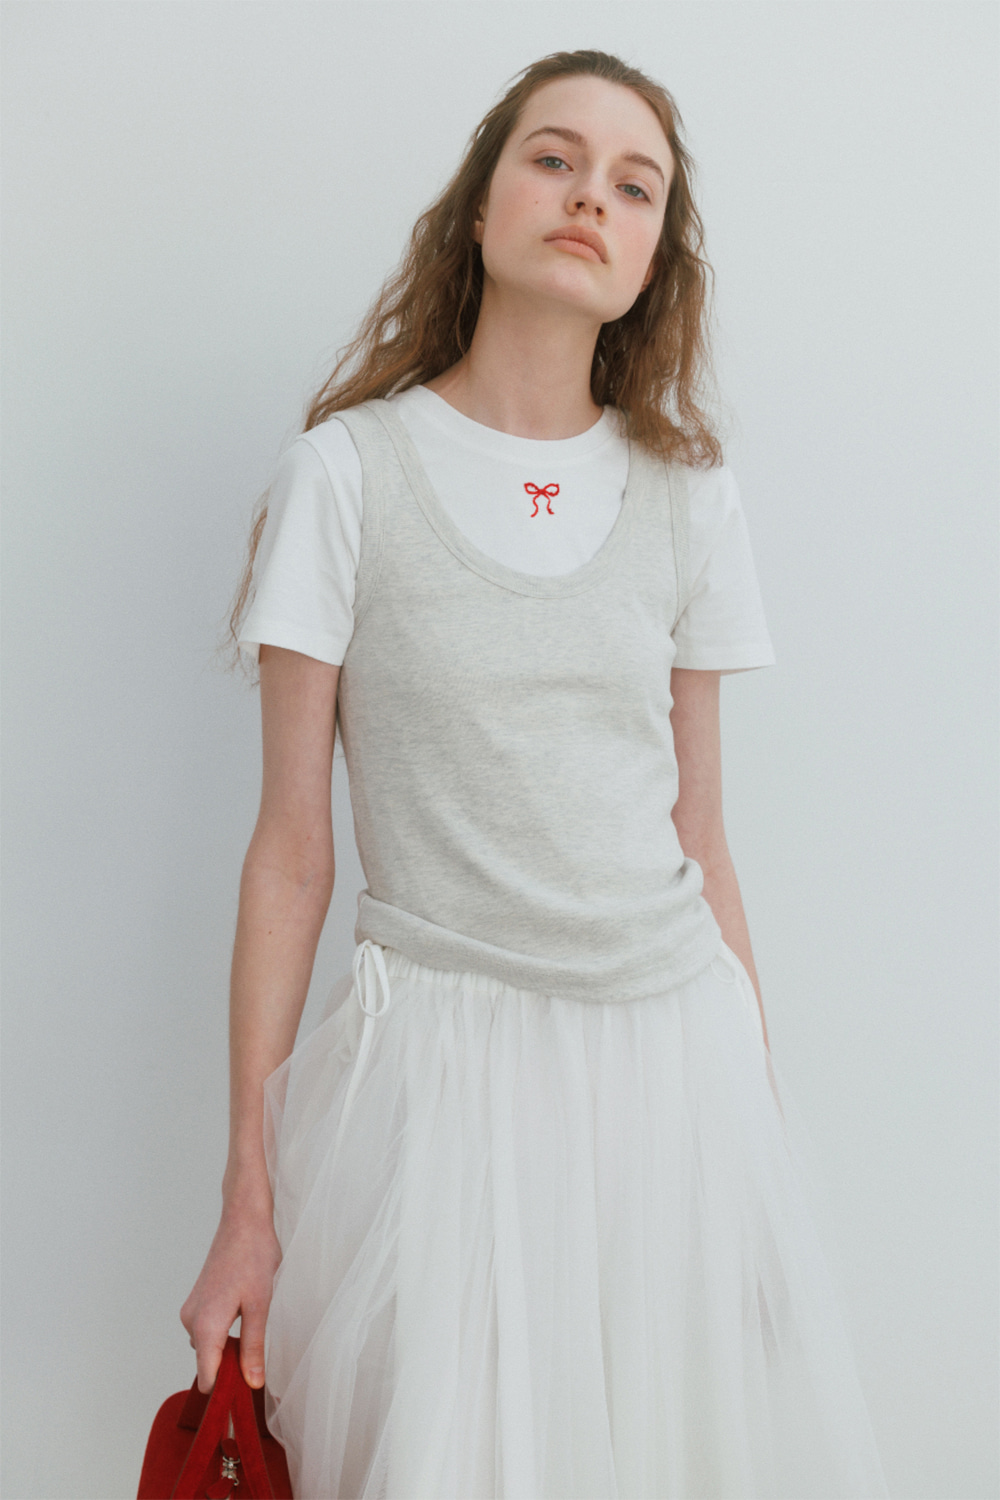 [REORDER] Embroidery Beads Tee in White (4/15일 예약배송)